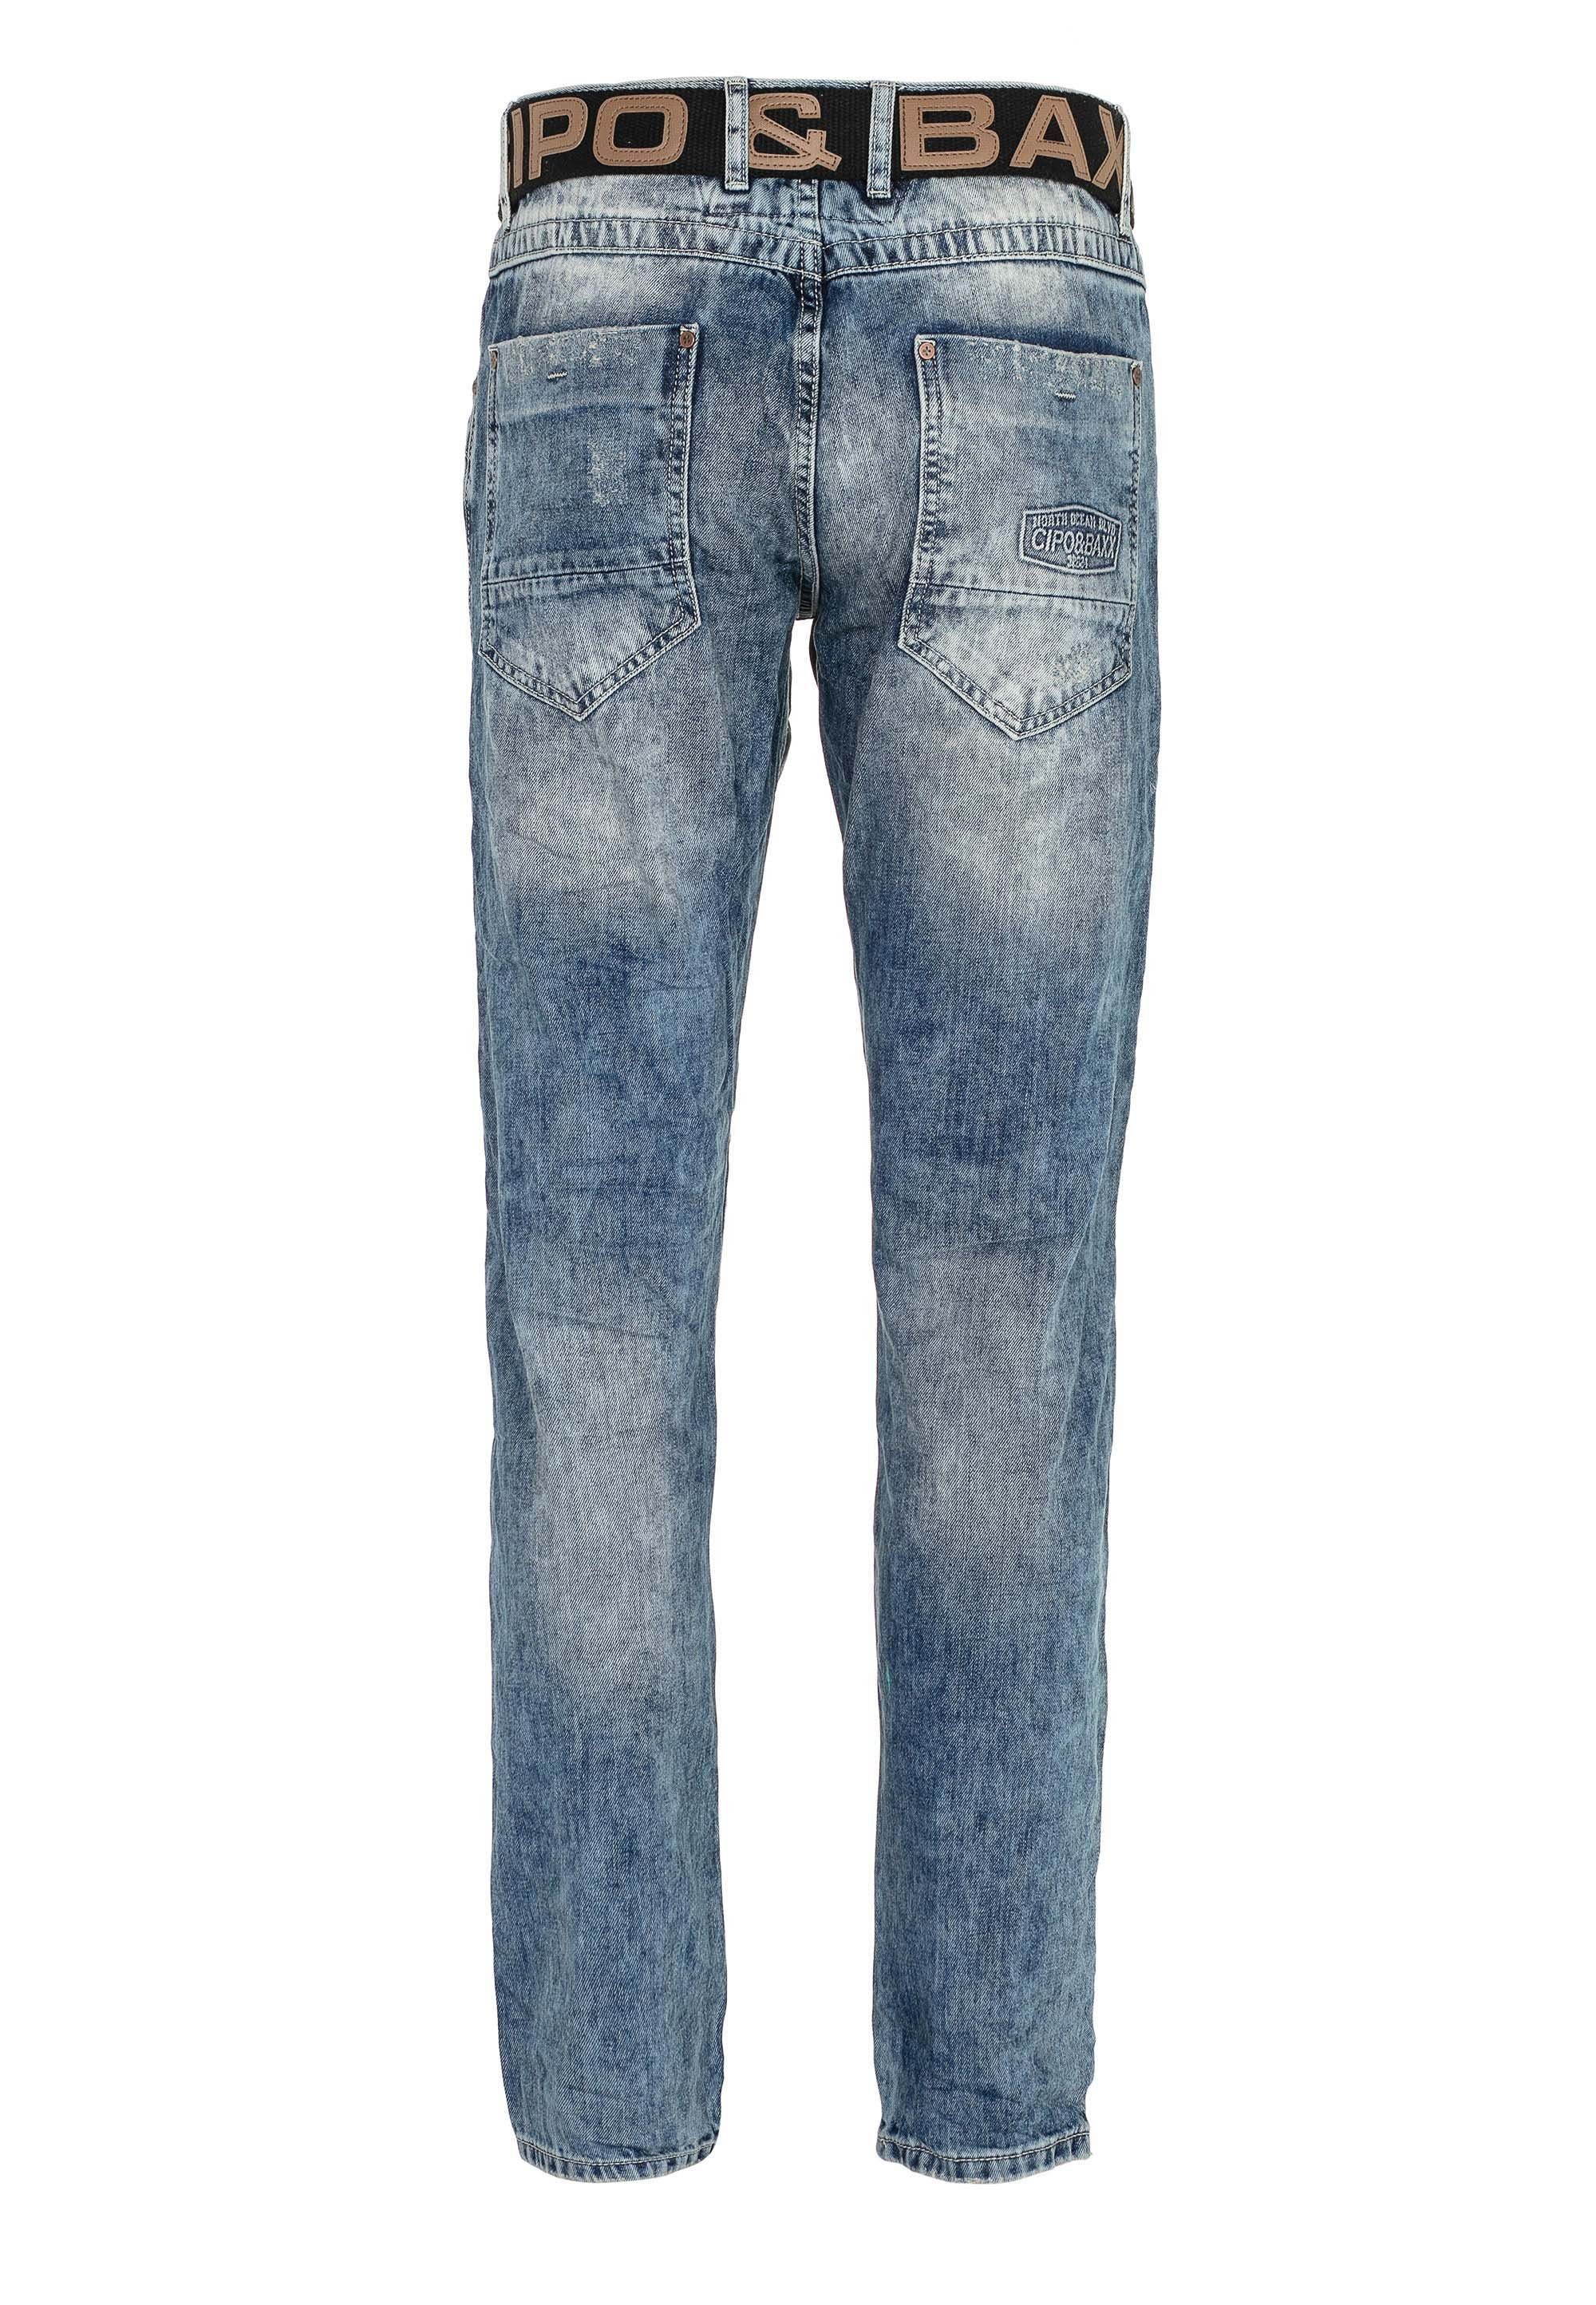 Cipo & Baxx Bequeme Jeans Straight-Fit in Ripped Details mit